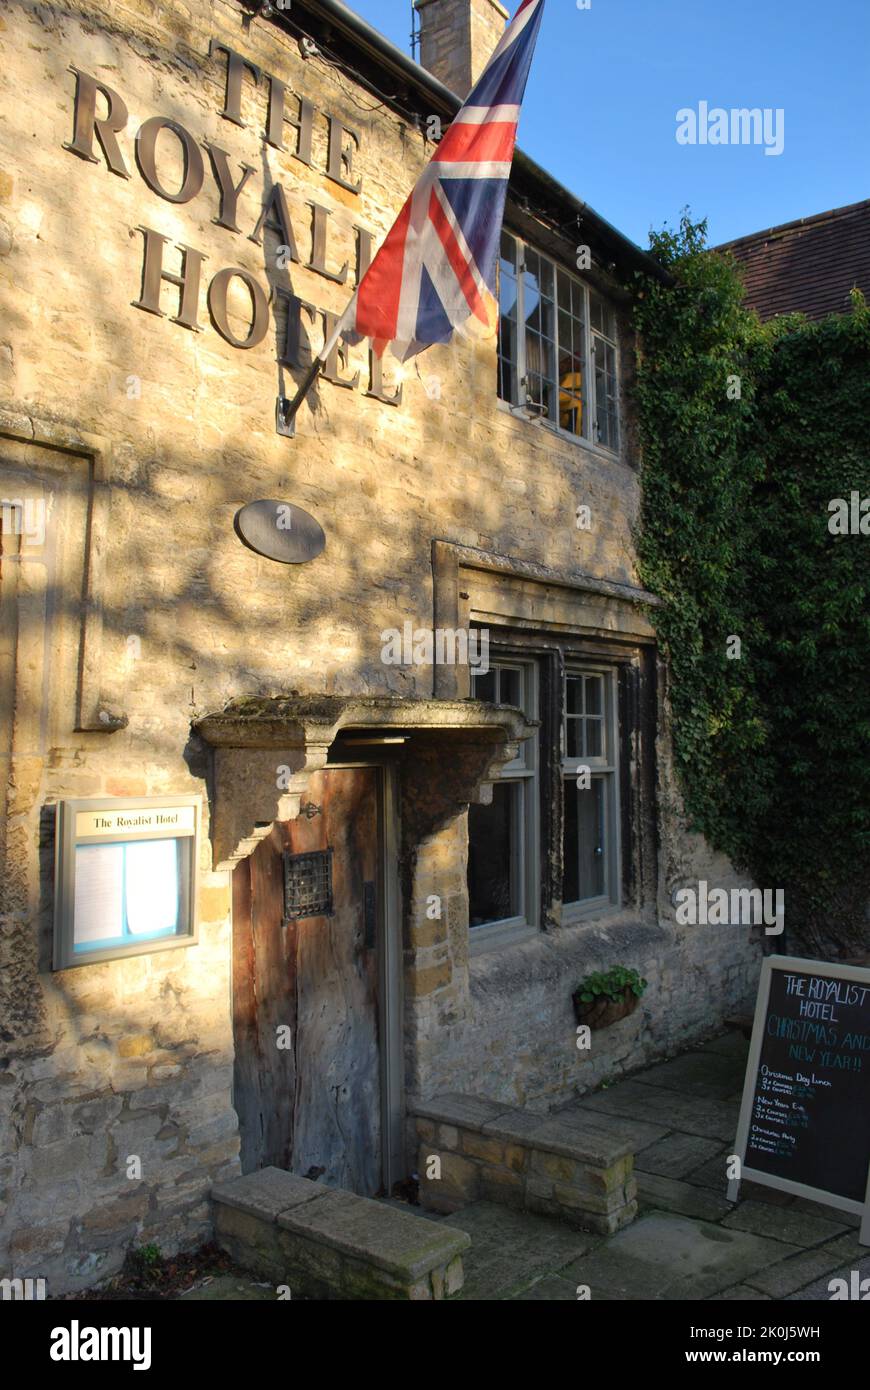 Das Royalist Hotel mit Union Jack in Stow-on-the-Wold, Cotswolds, England Stockfoto